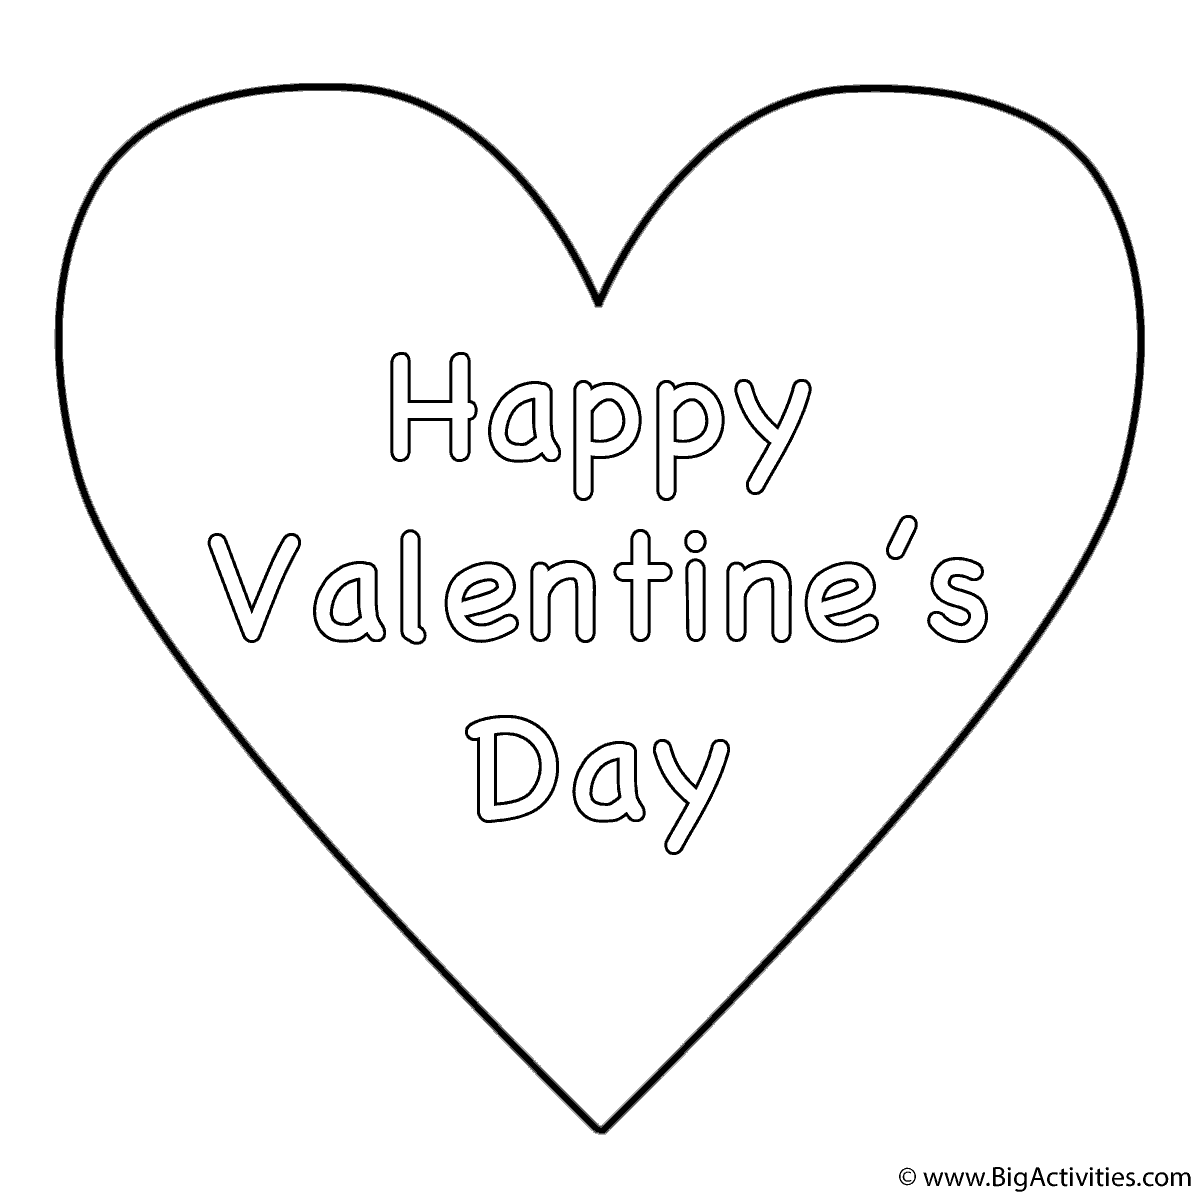 Valentine's Day Coloring Pages Online